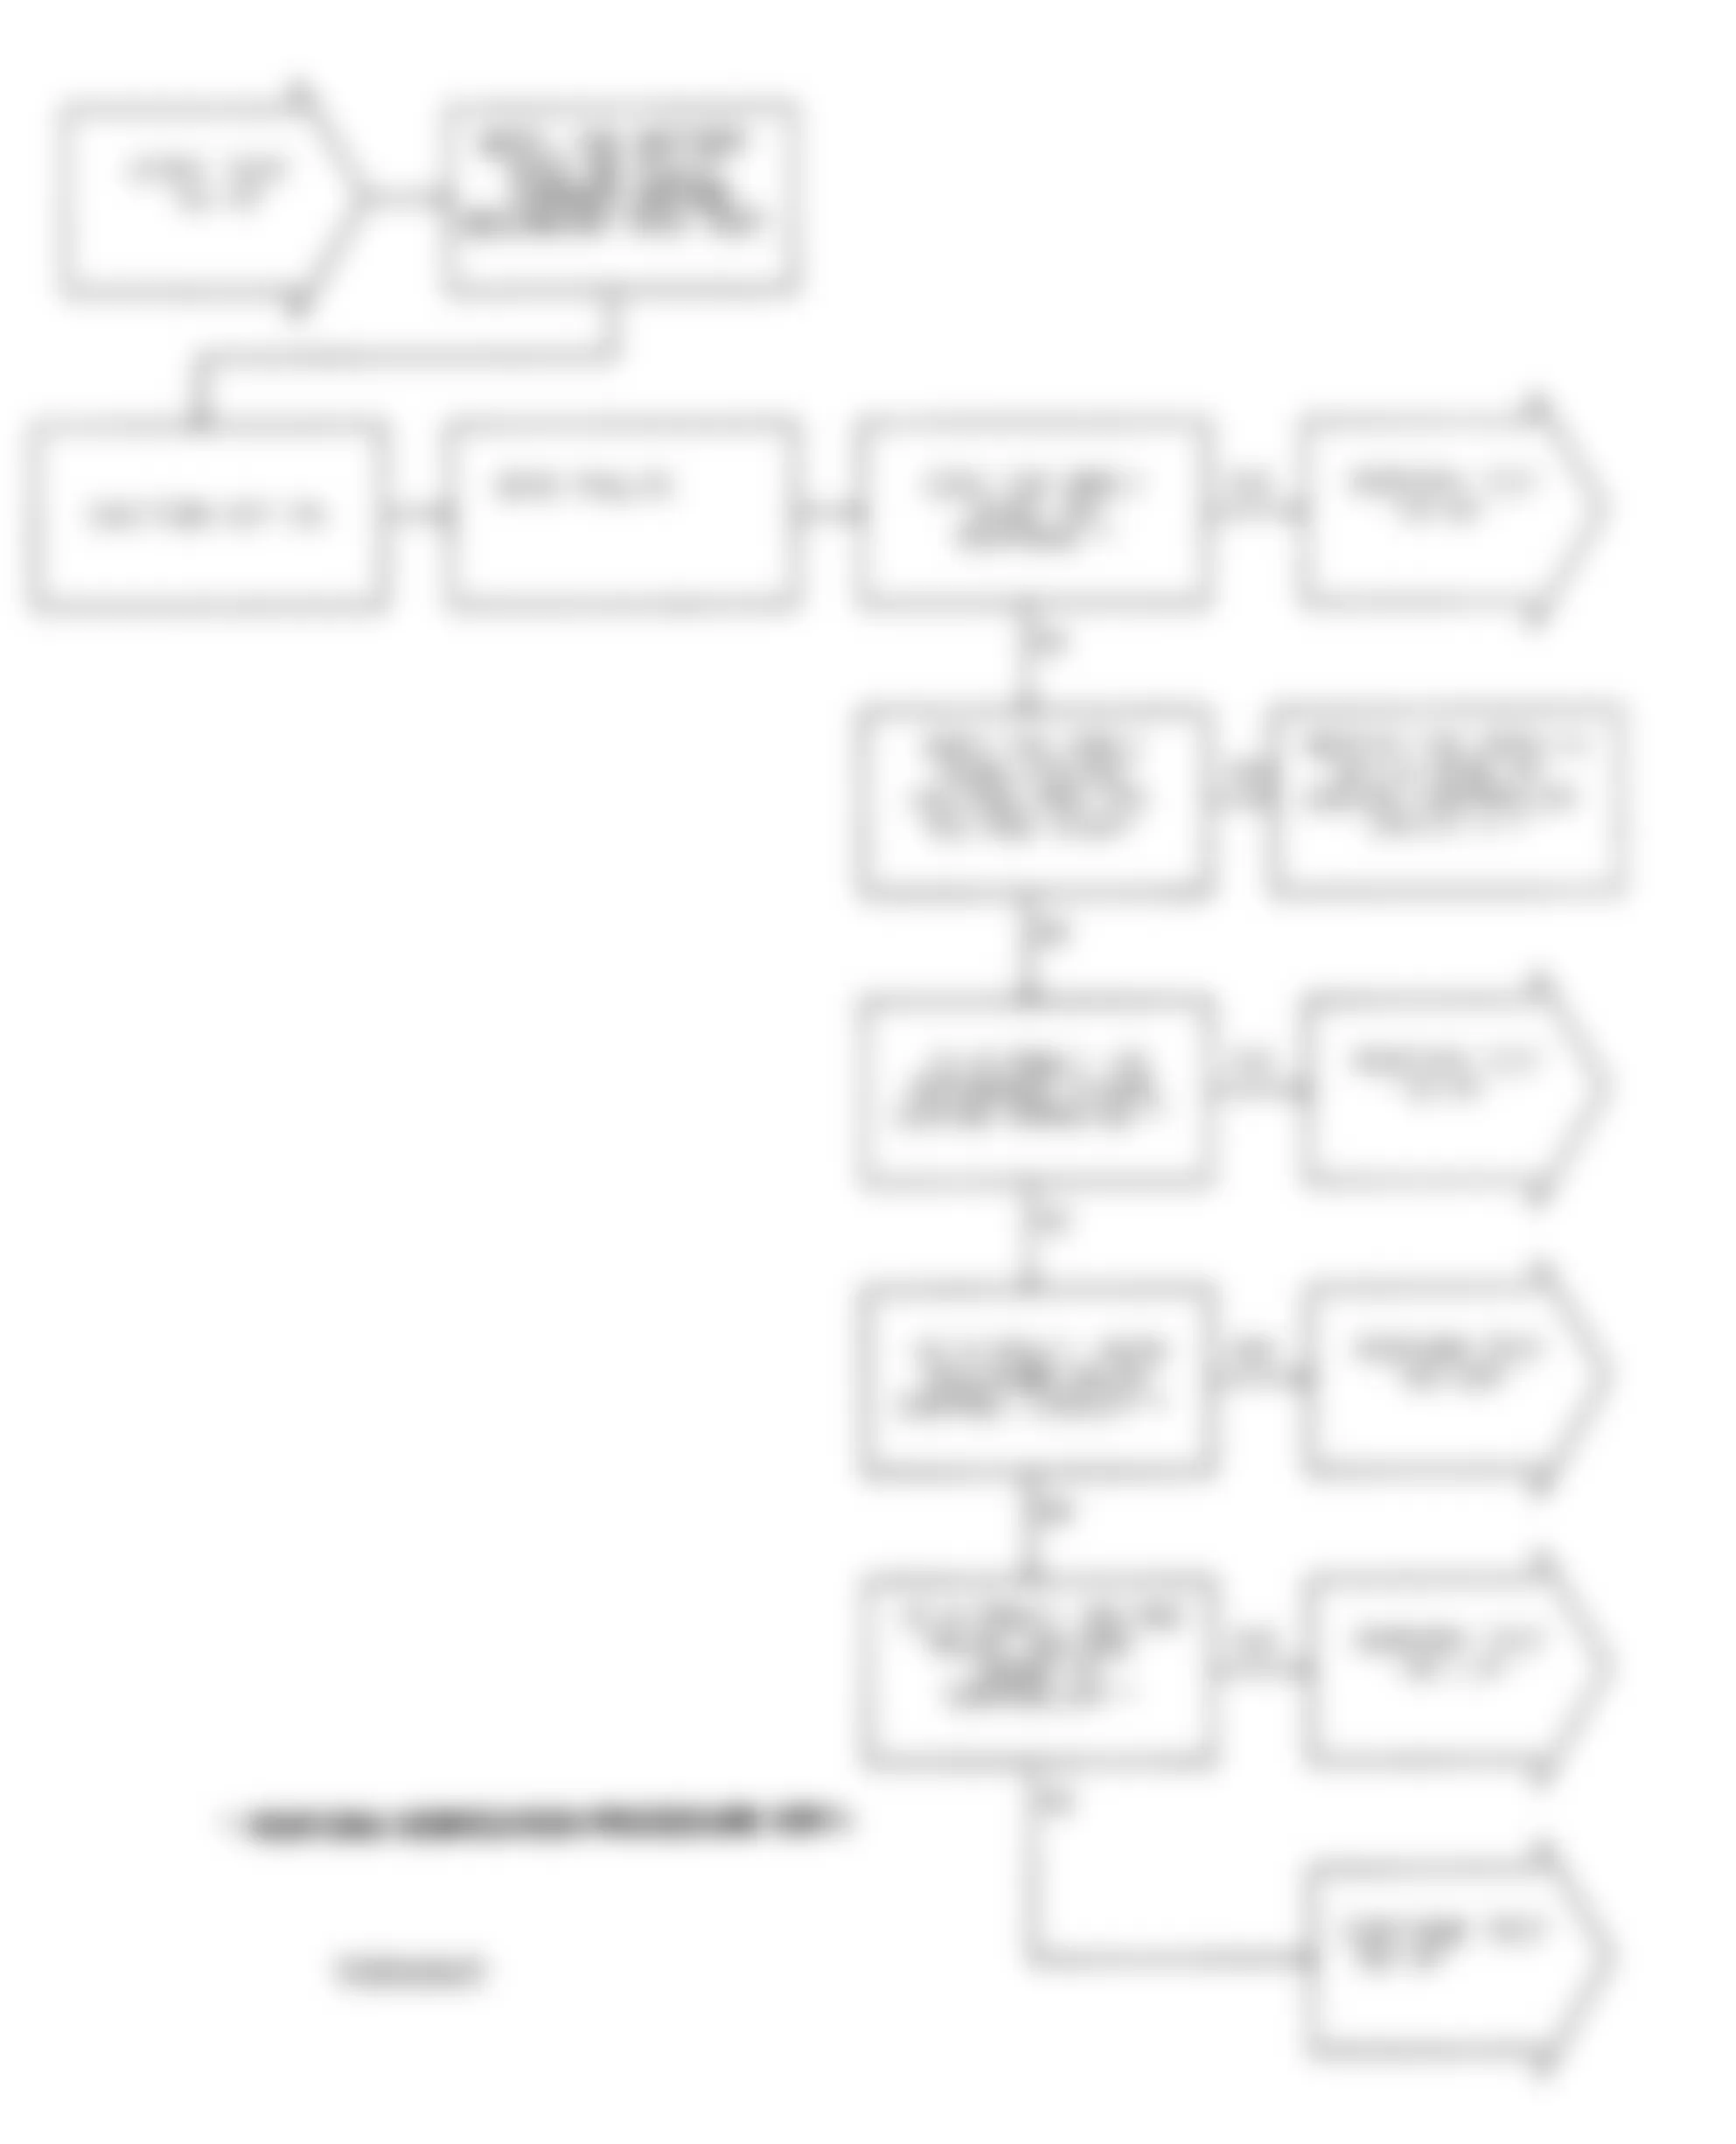 Dodge Shadow America 1991 - Component Locations -  Test NS-1A, Diagnostic Flow Chart (1 of 4)